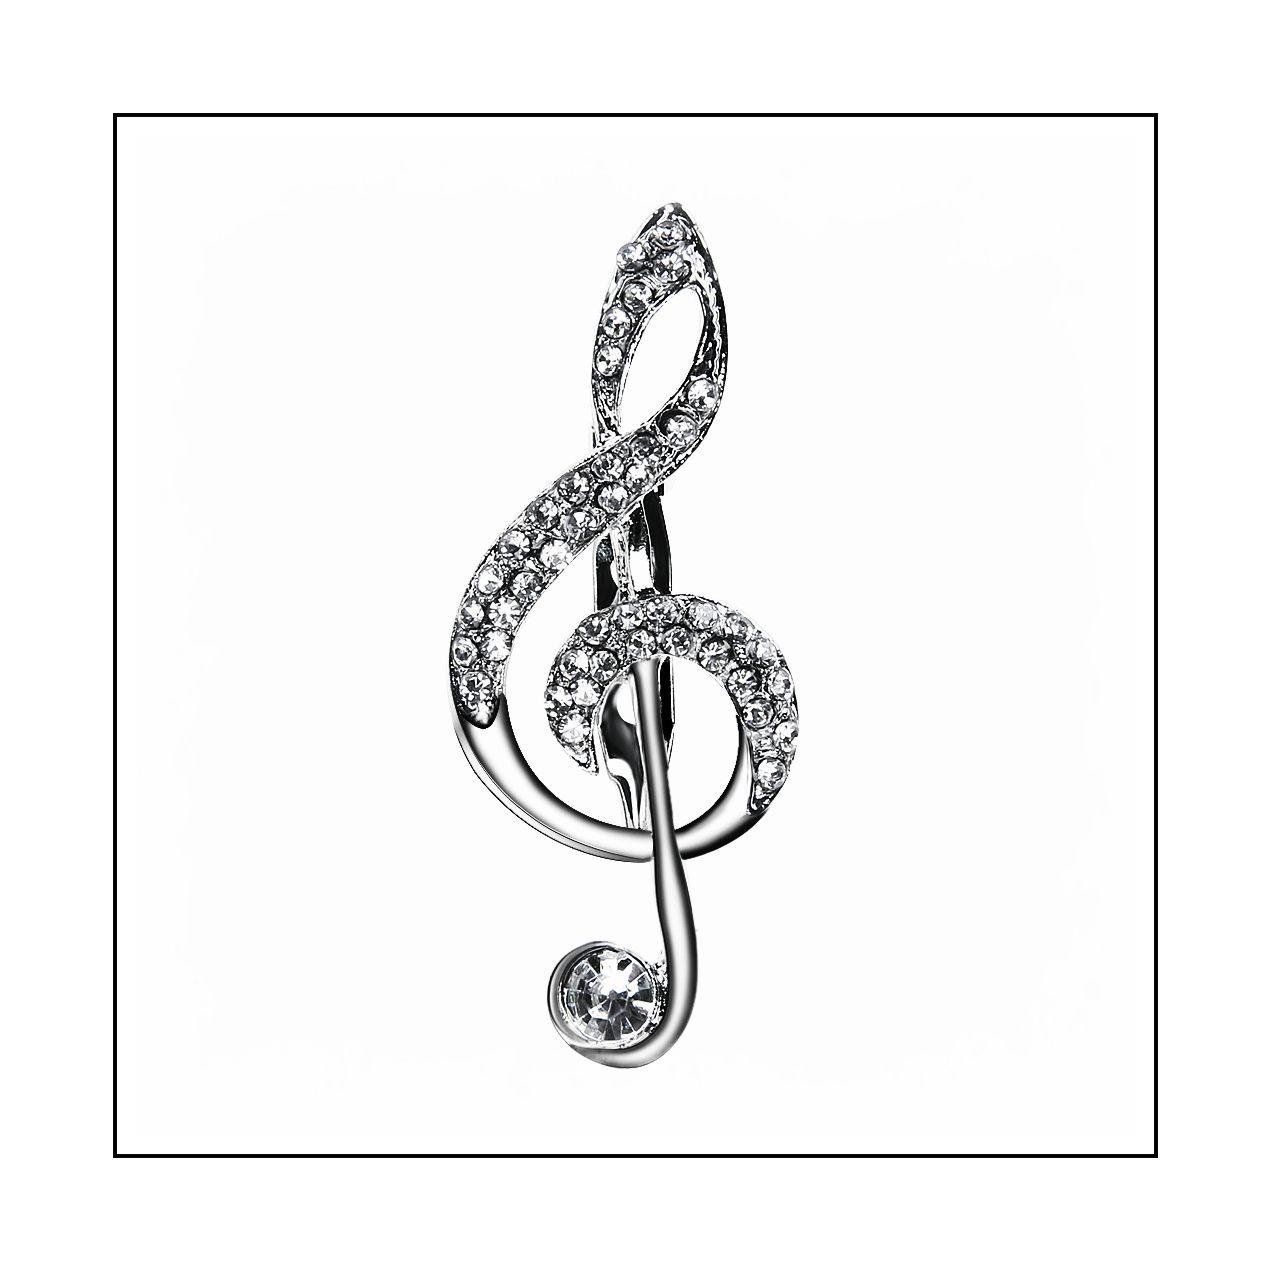 Music G Clef Brooch With Crystal Stones